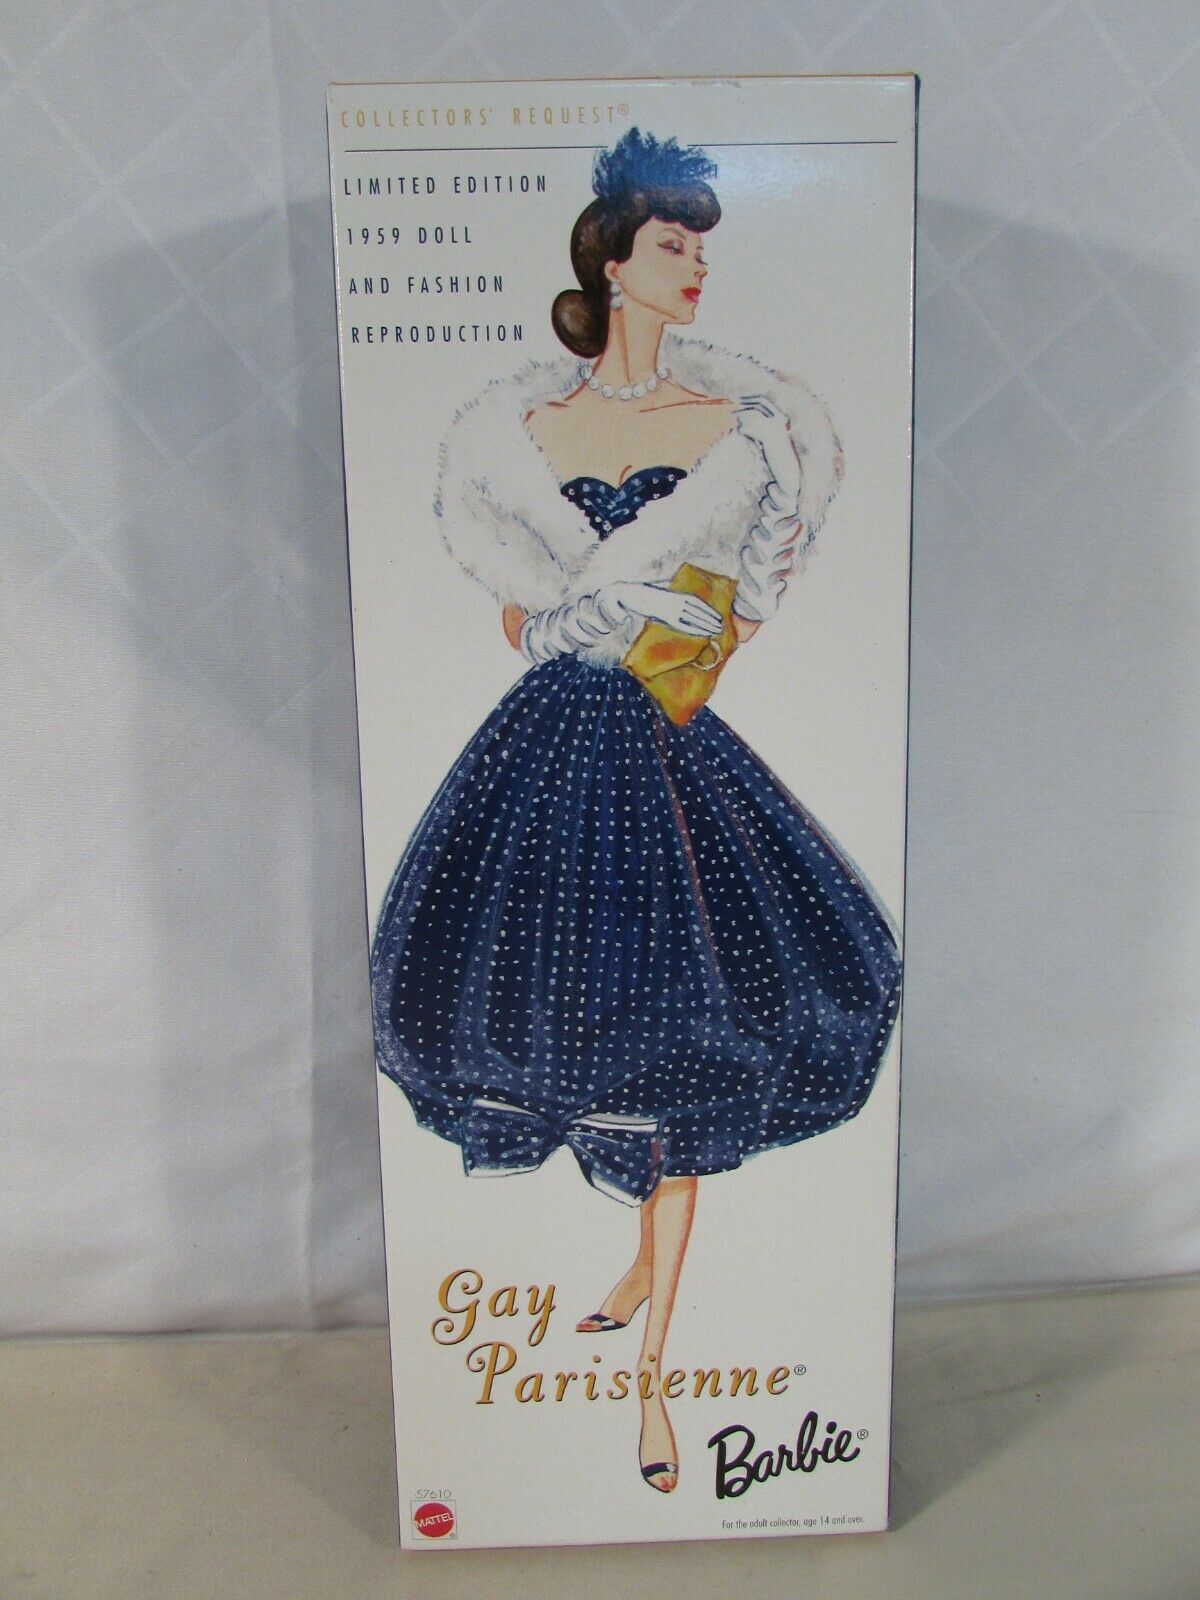 Limited Edition Mattel 1959 Reproduction Gay Parisienne Doll #57610